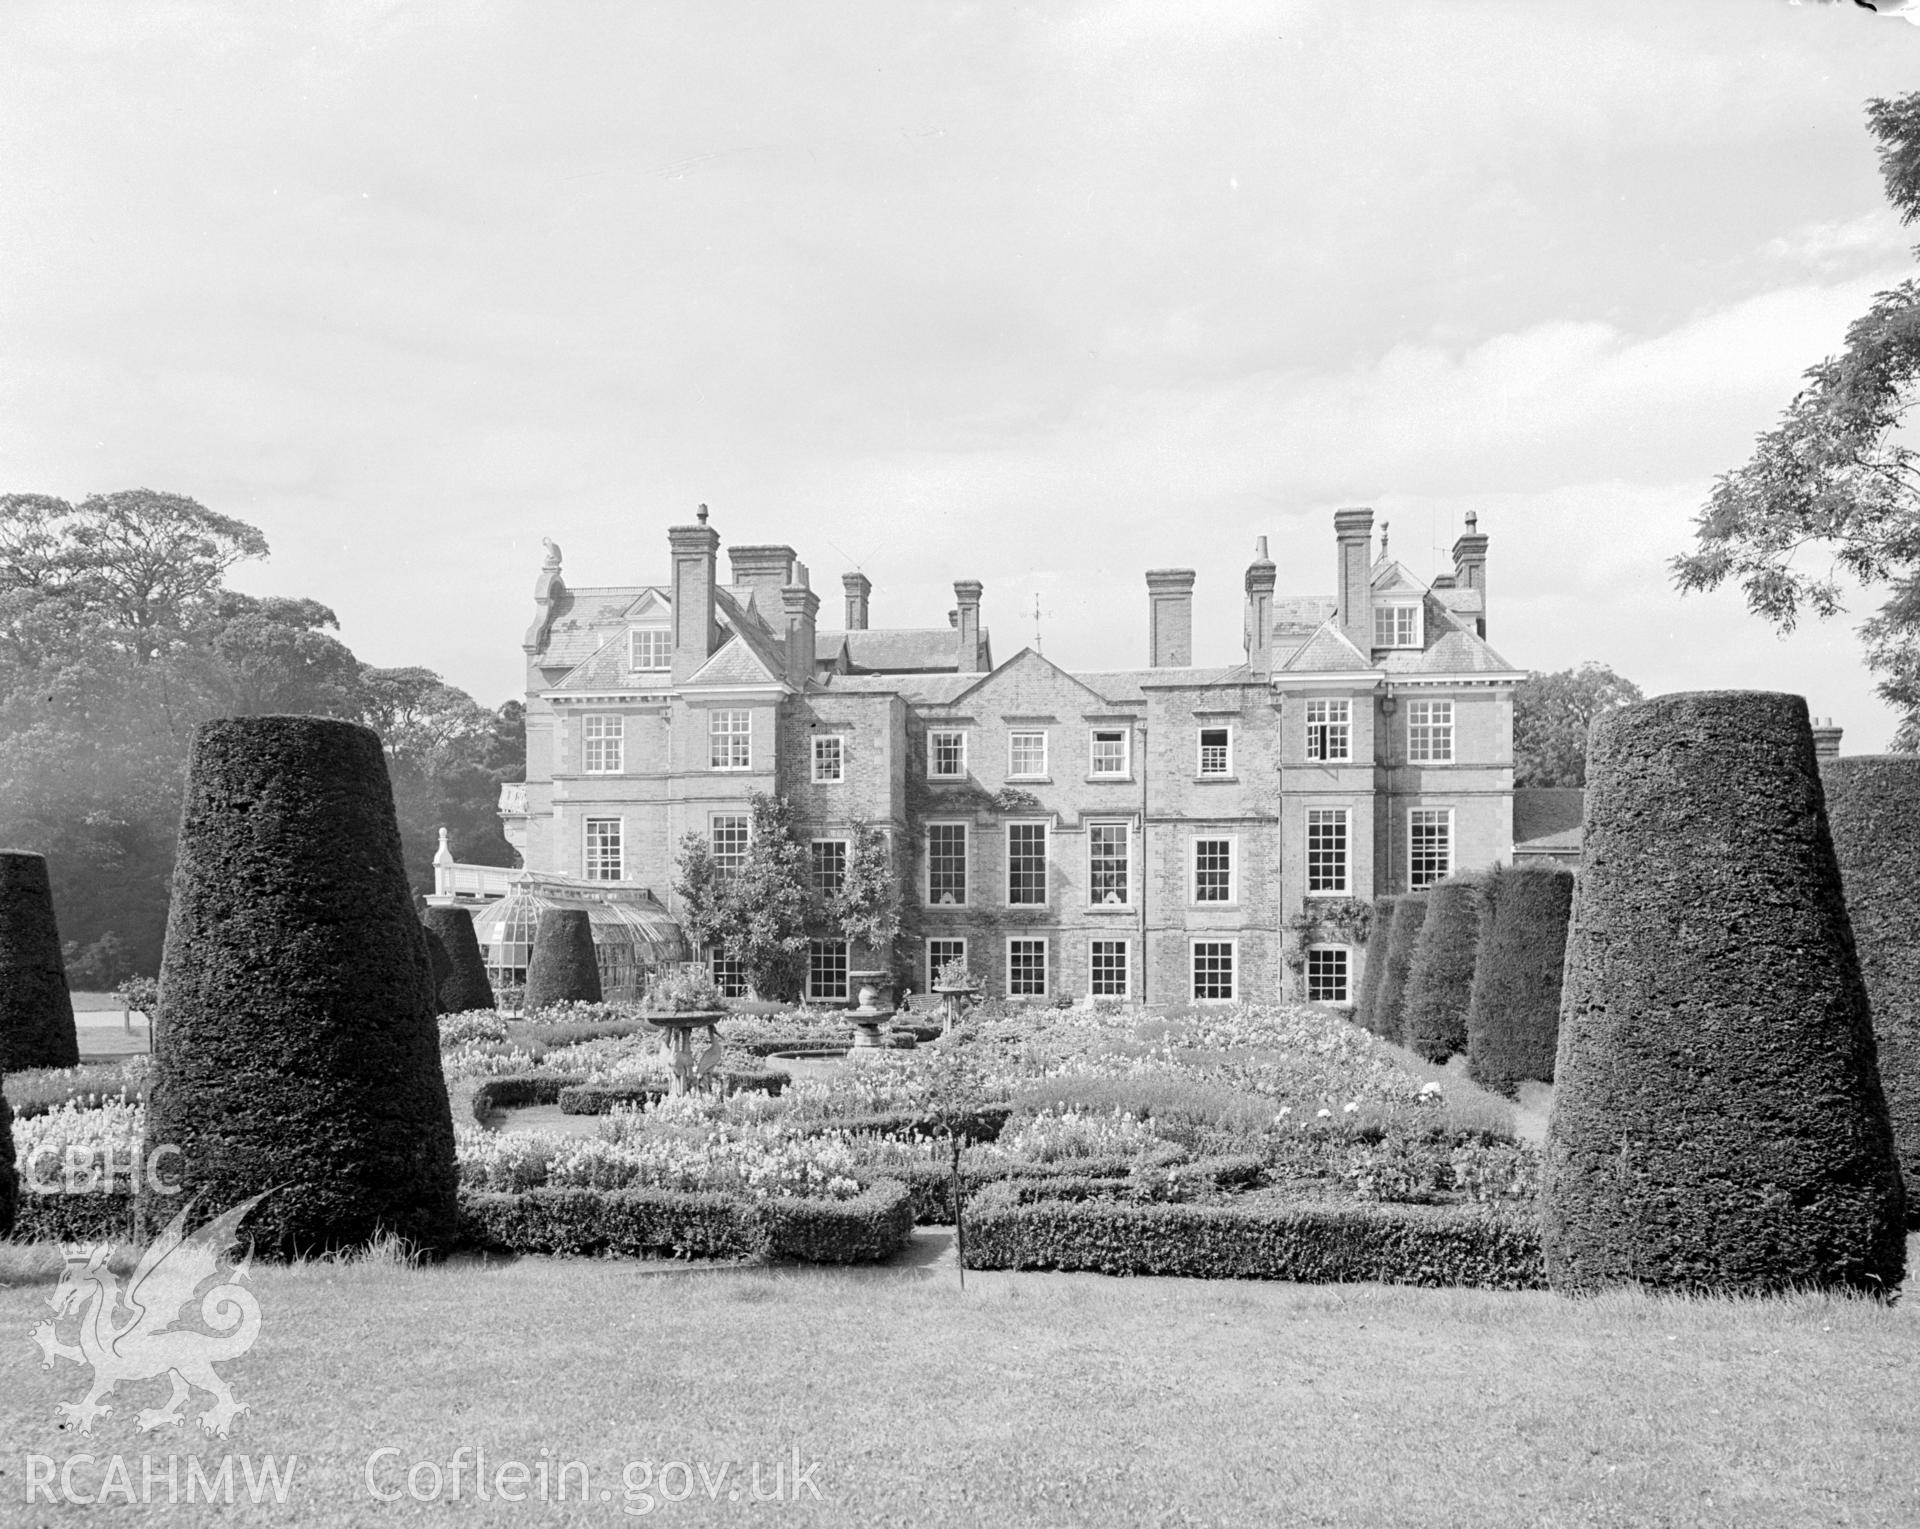 A photograph showing Bodrhyddan Hall and gardens from the south.